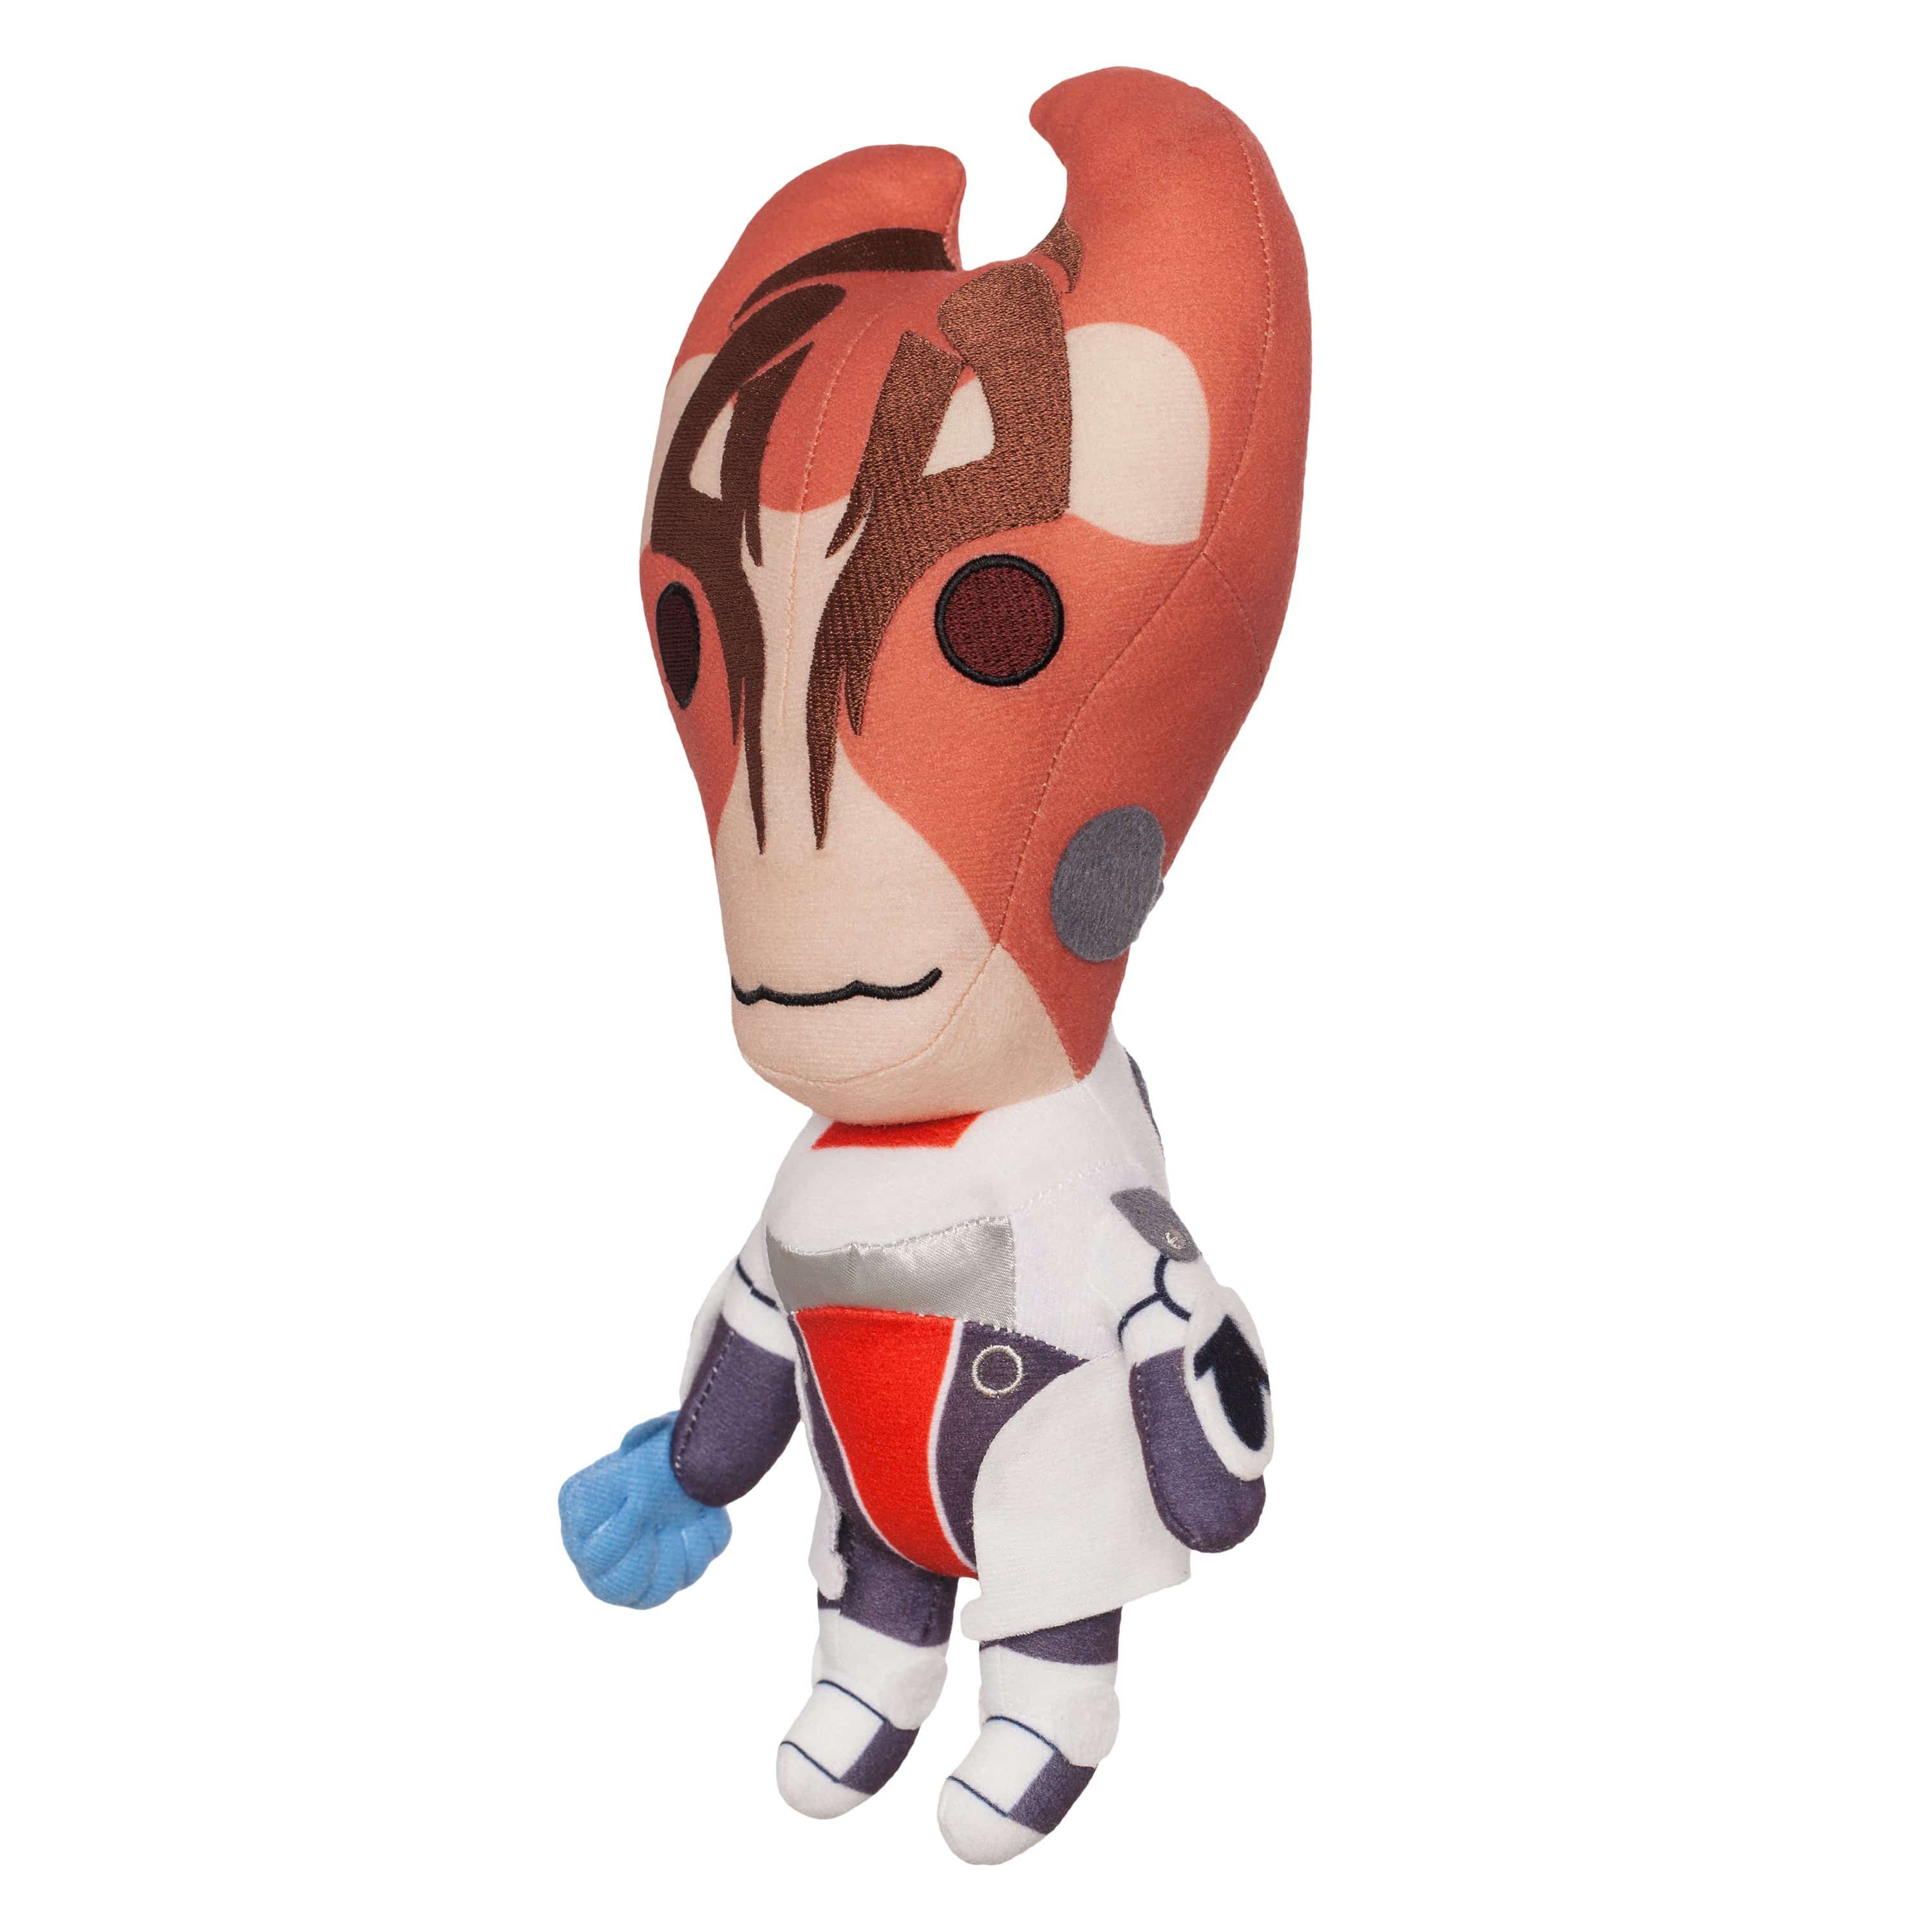 Mass Effect - 12" Mordin Solus Collector's Stuffed Plush Side View